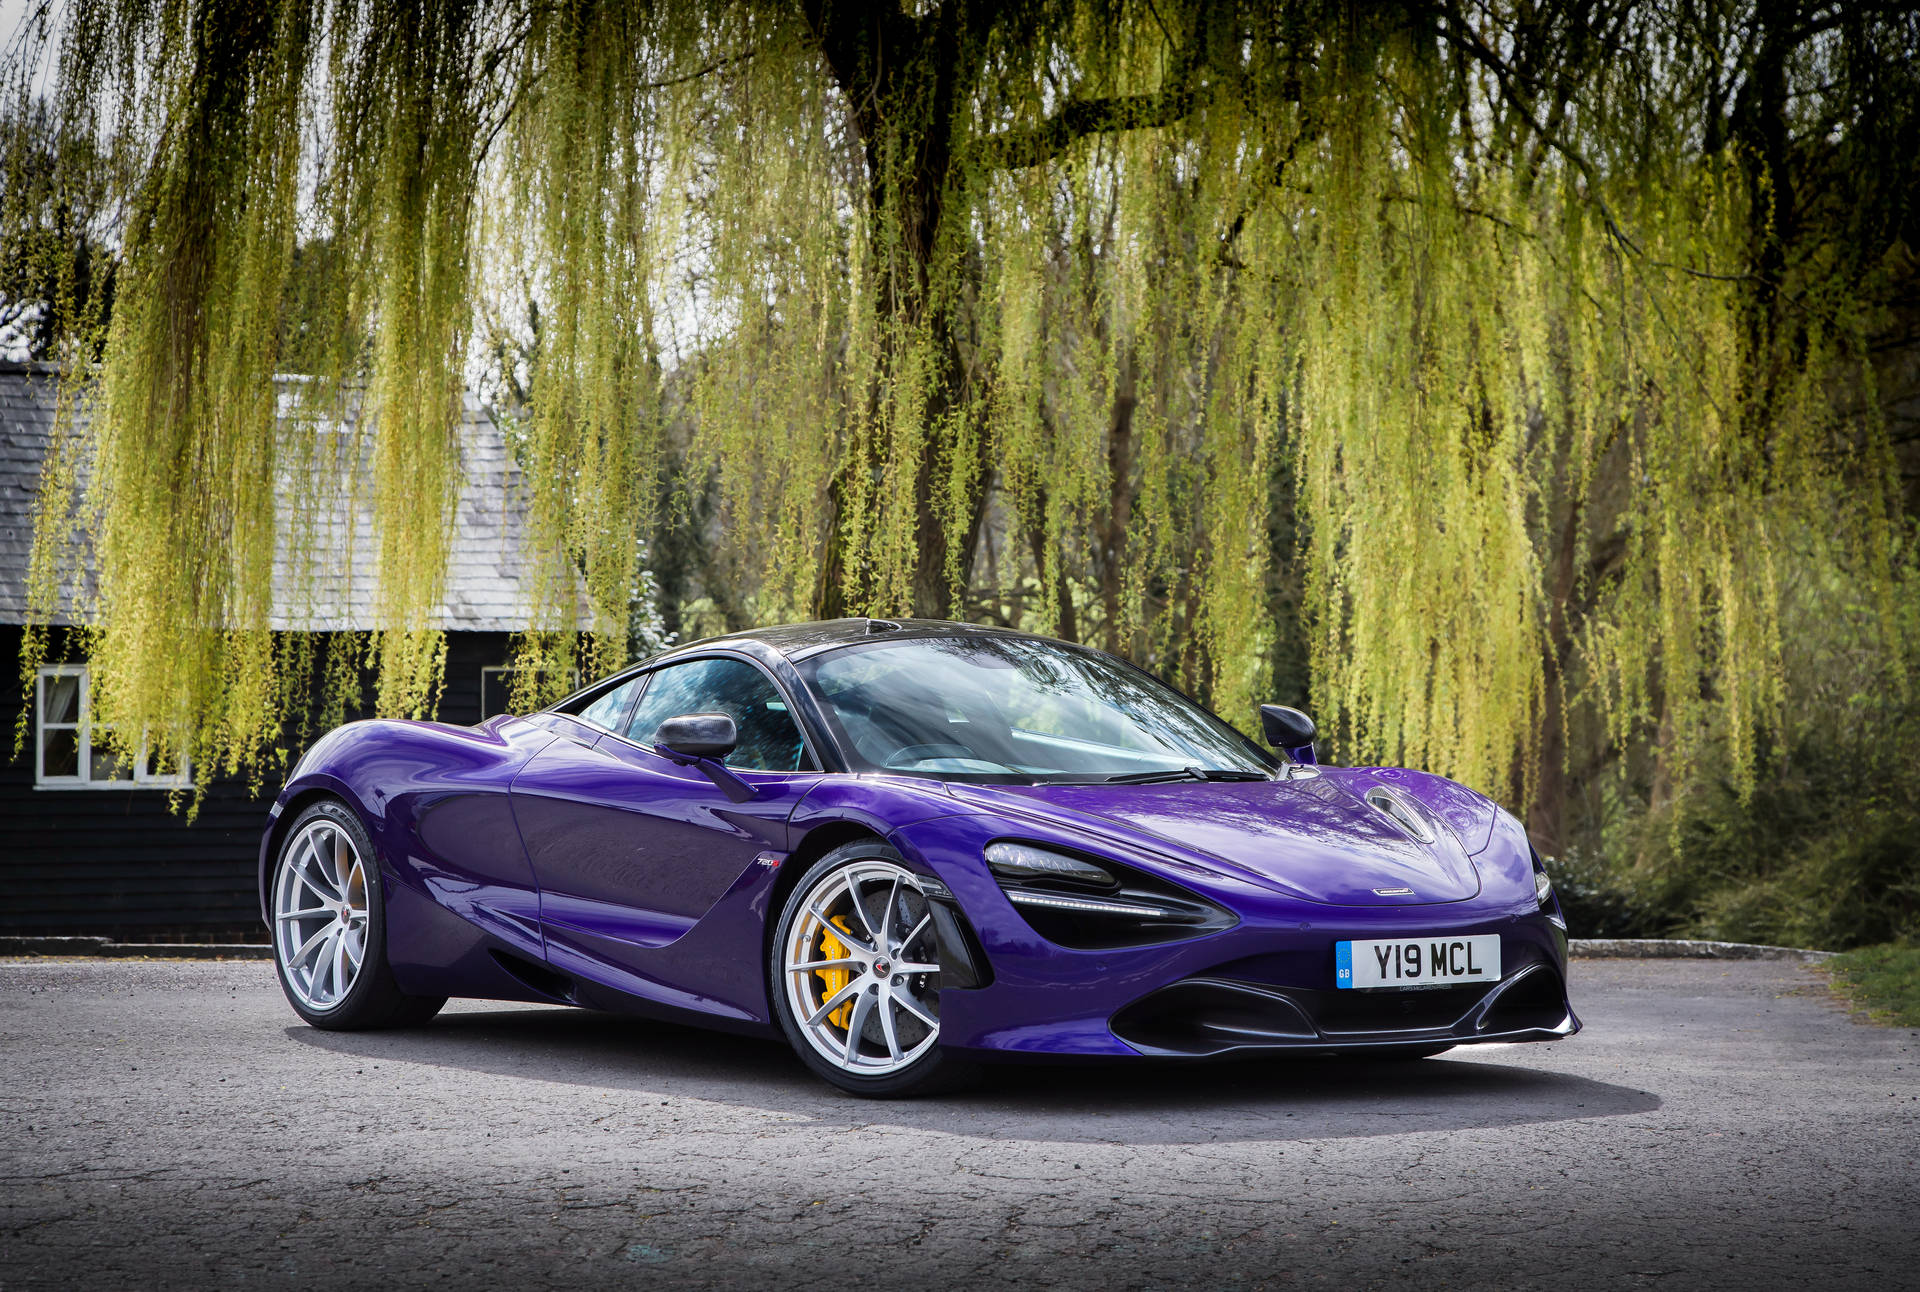 Showcasing Power And Luxury: The Stunning Mclaren 720s In Violet Background